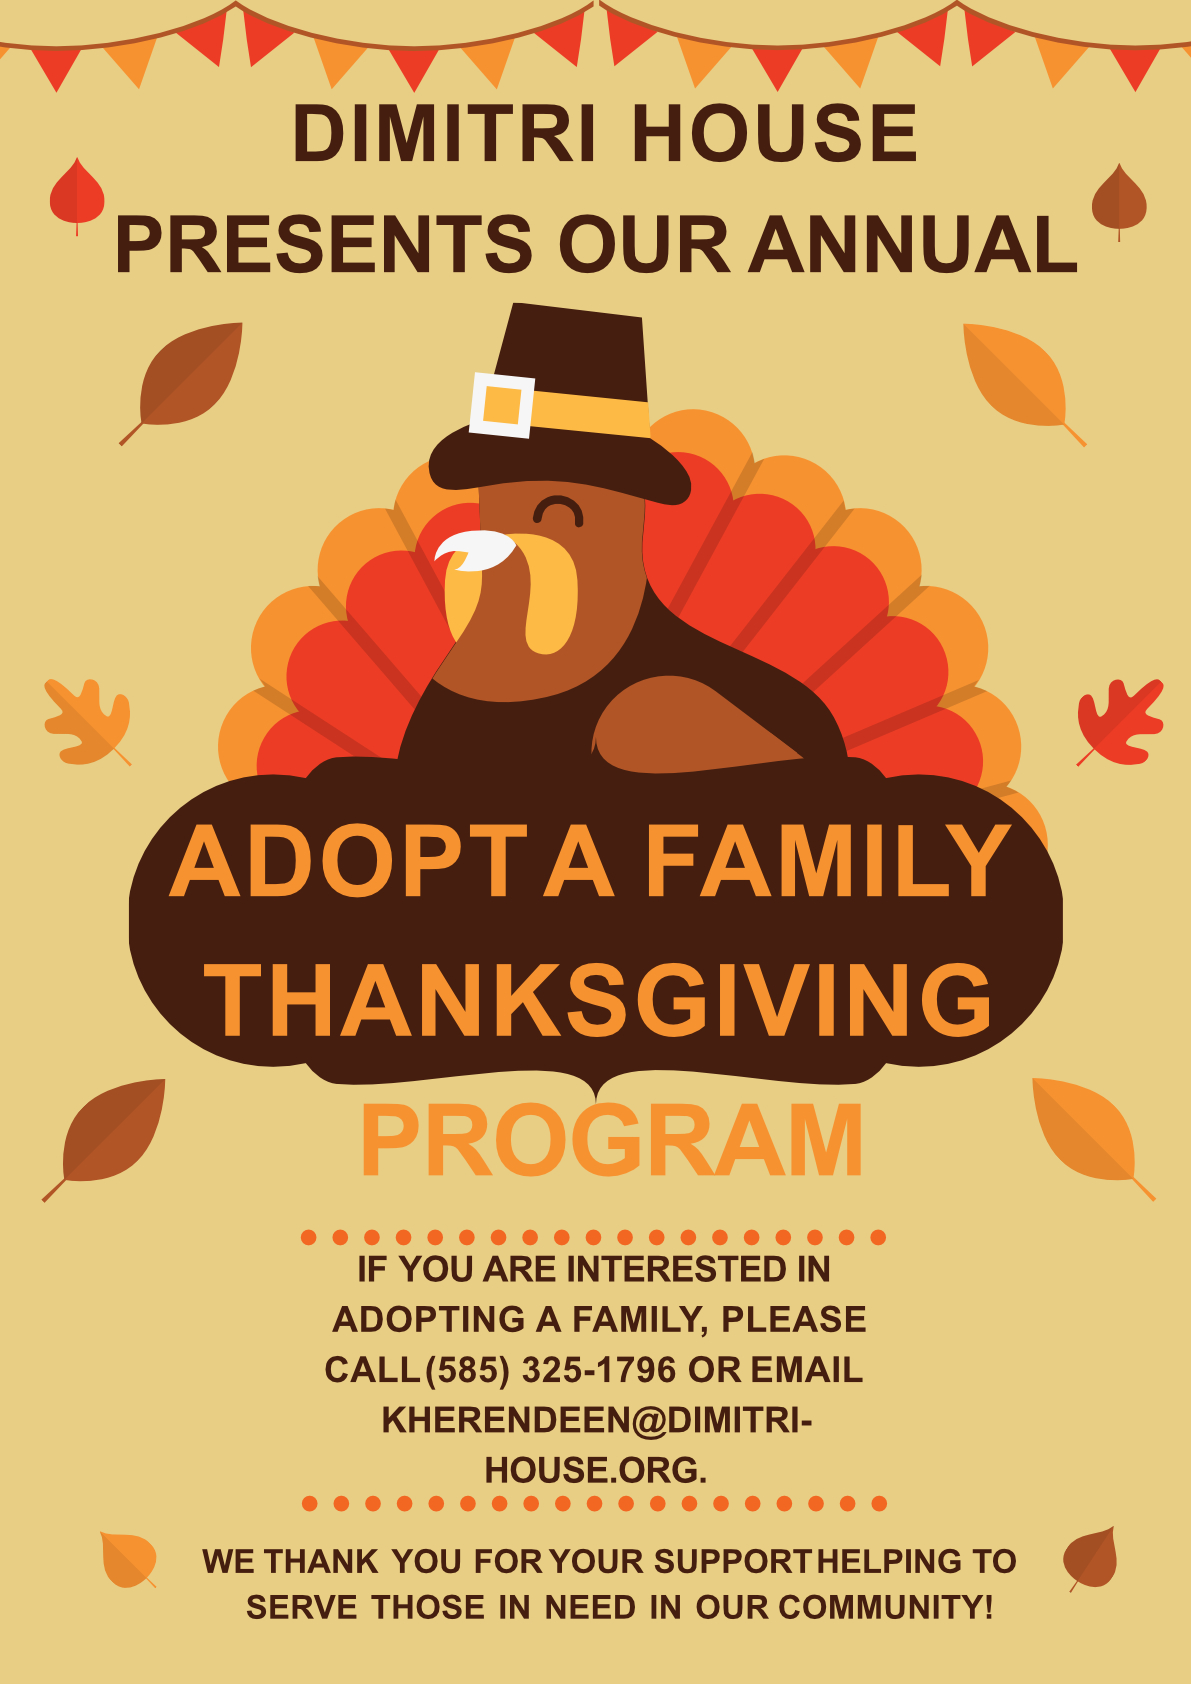 Be a part of the next successful Dimitri House Thanksgiving "Adopt A